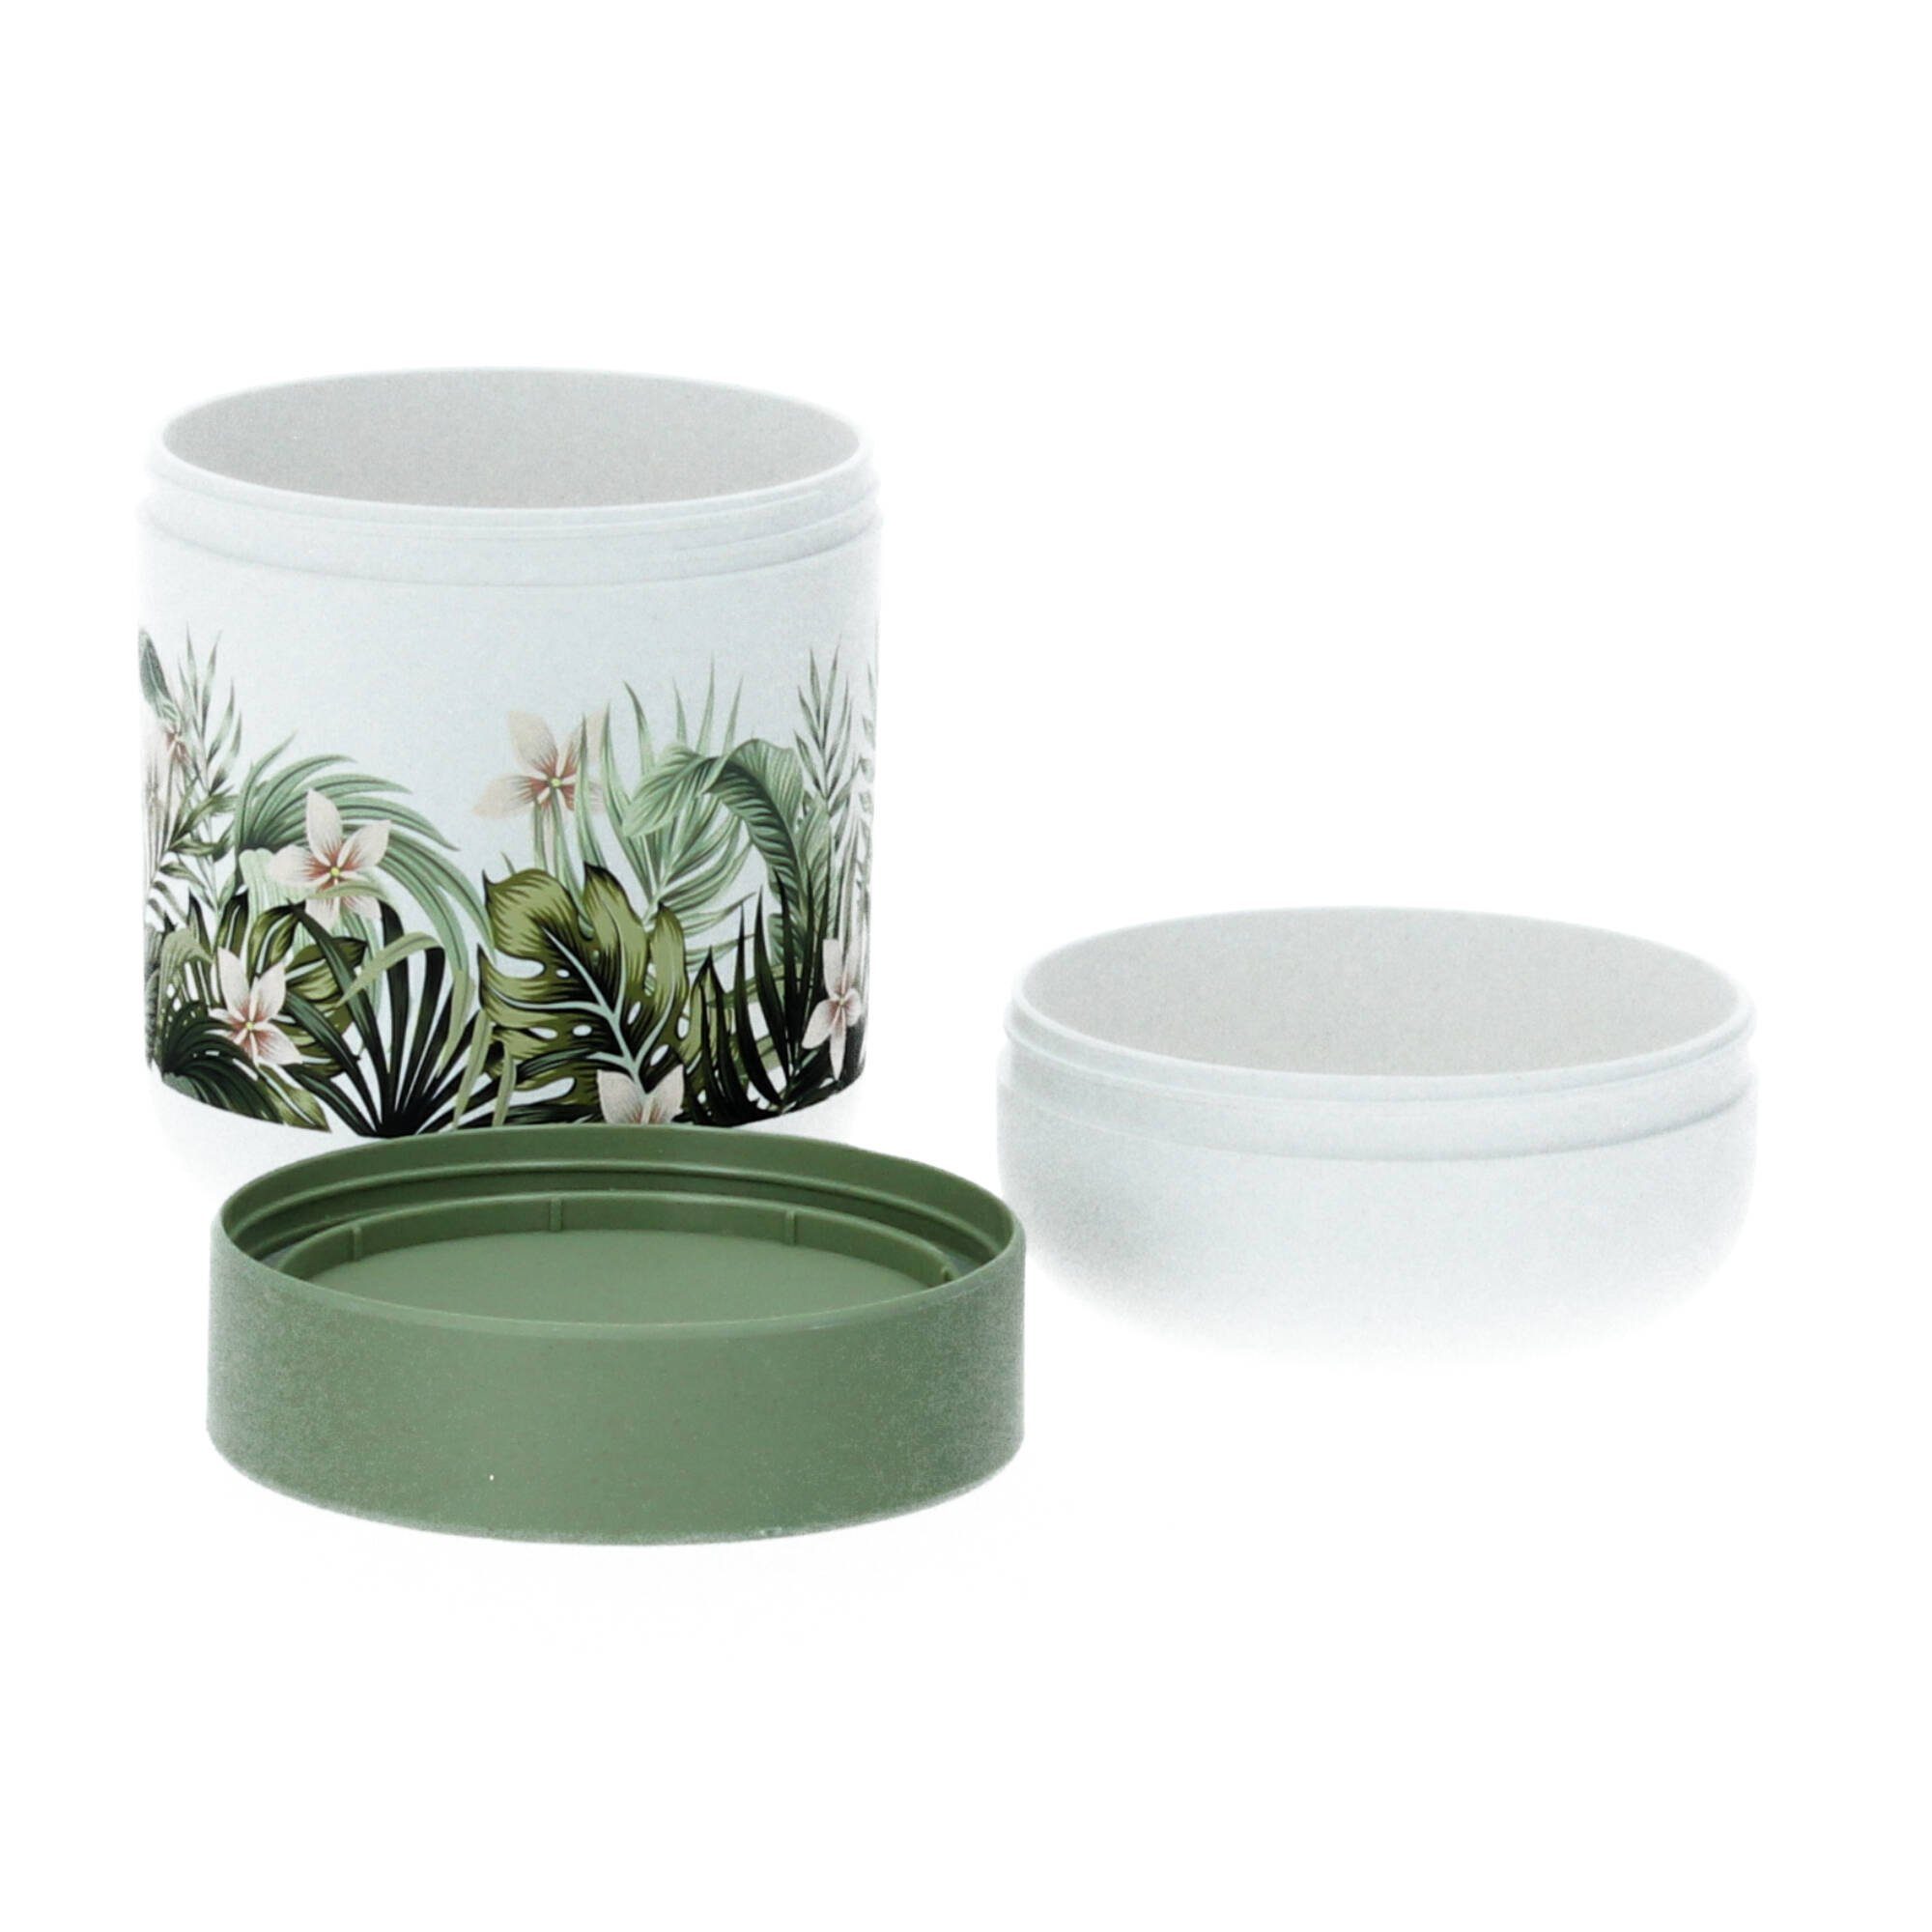 aus bioloco (Kunststoff PLA leaves with flowers, Lunchpot plant Lunchbox Pflanzenzucker) chic GmbH mic